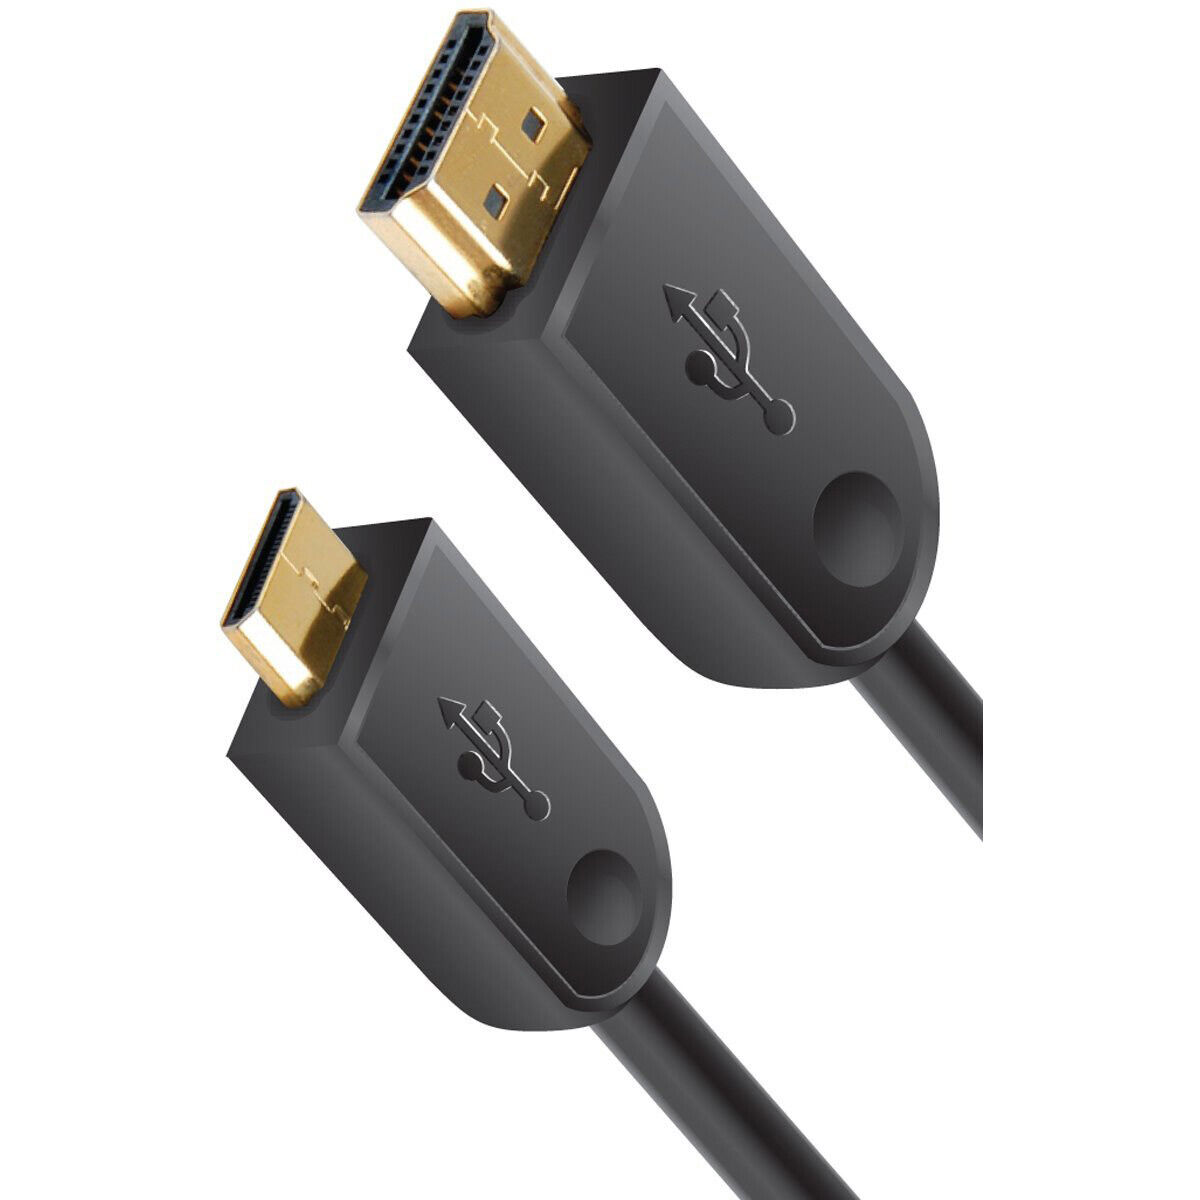 GCP Products High Speed Mini-Hdmi To Hdmi A/V Cable 6 Feet ()